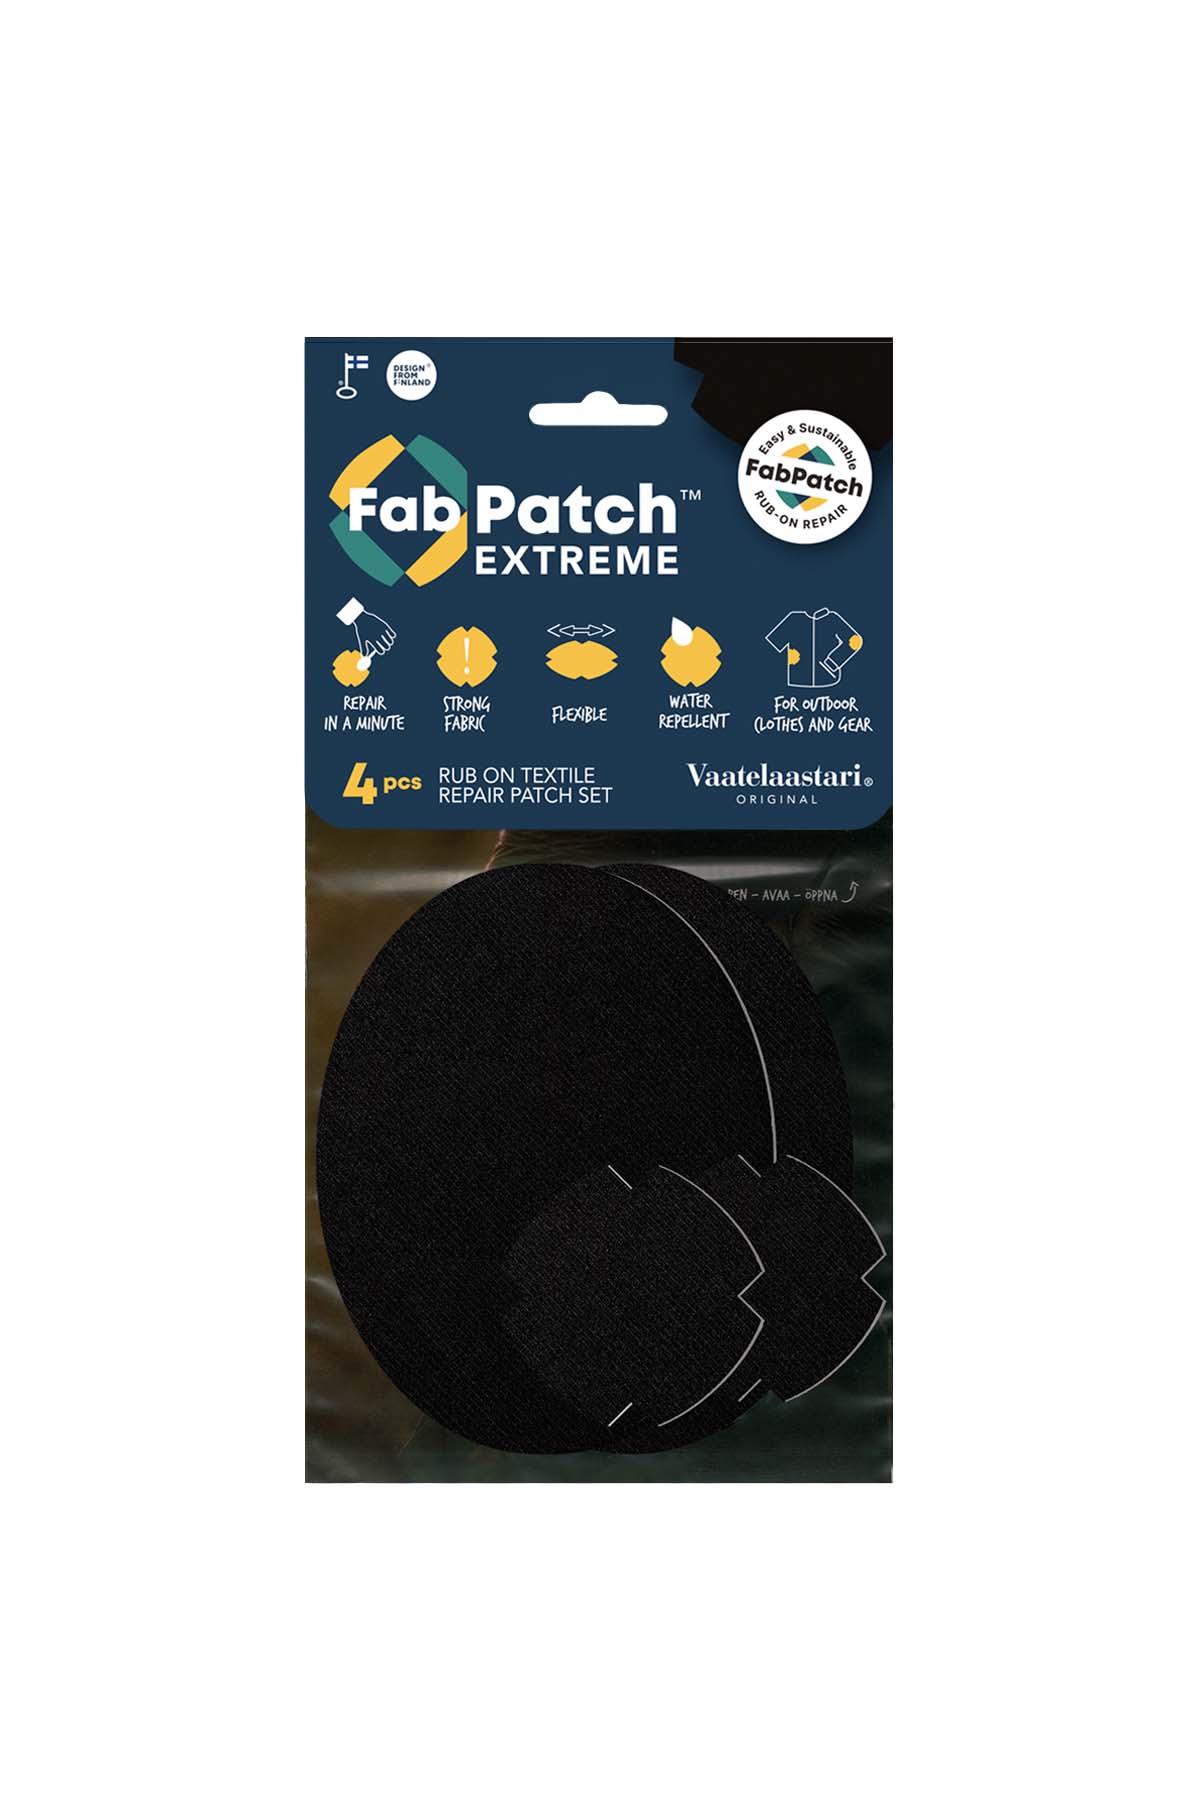 FABPATCH EXTREME